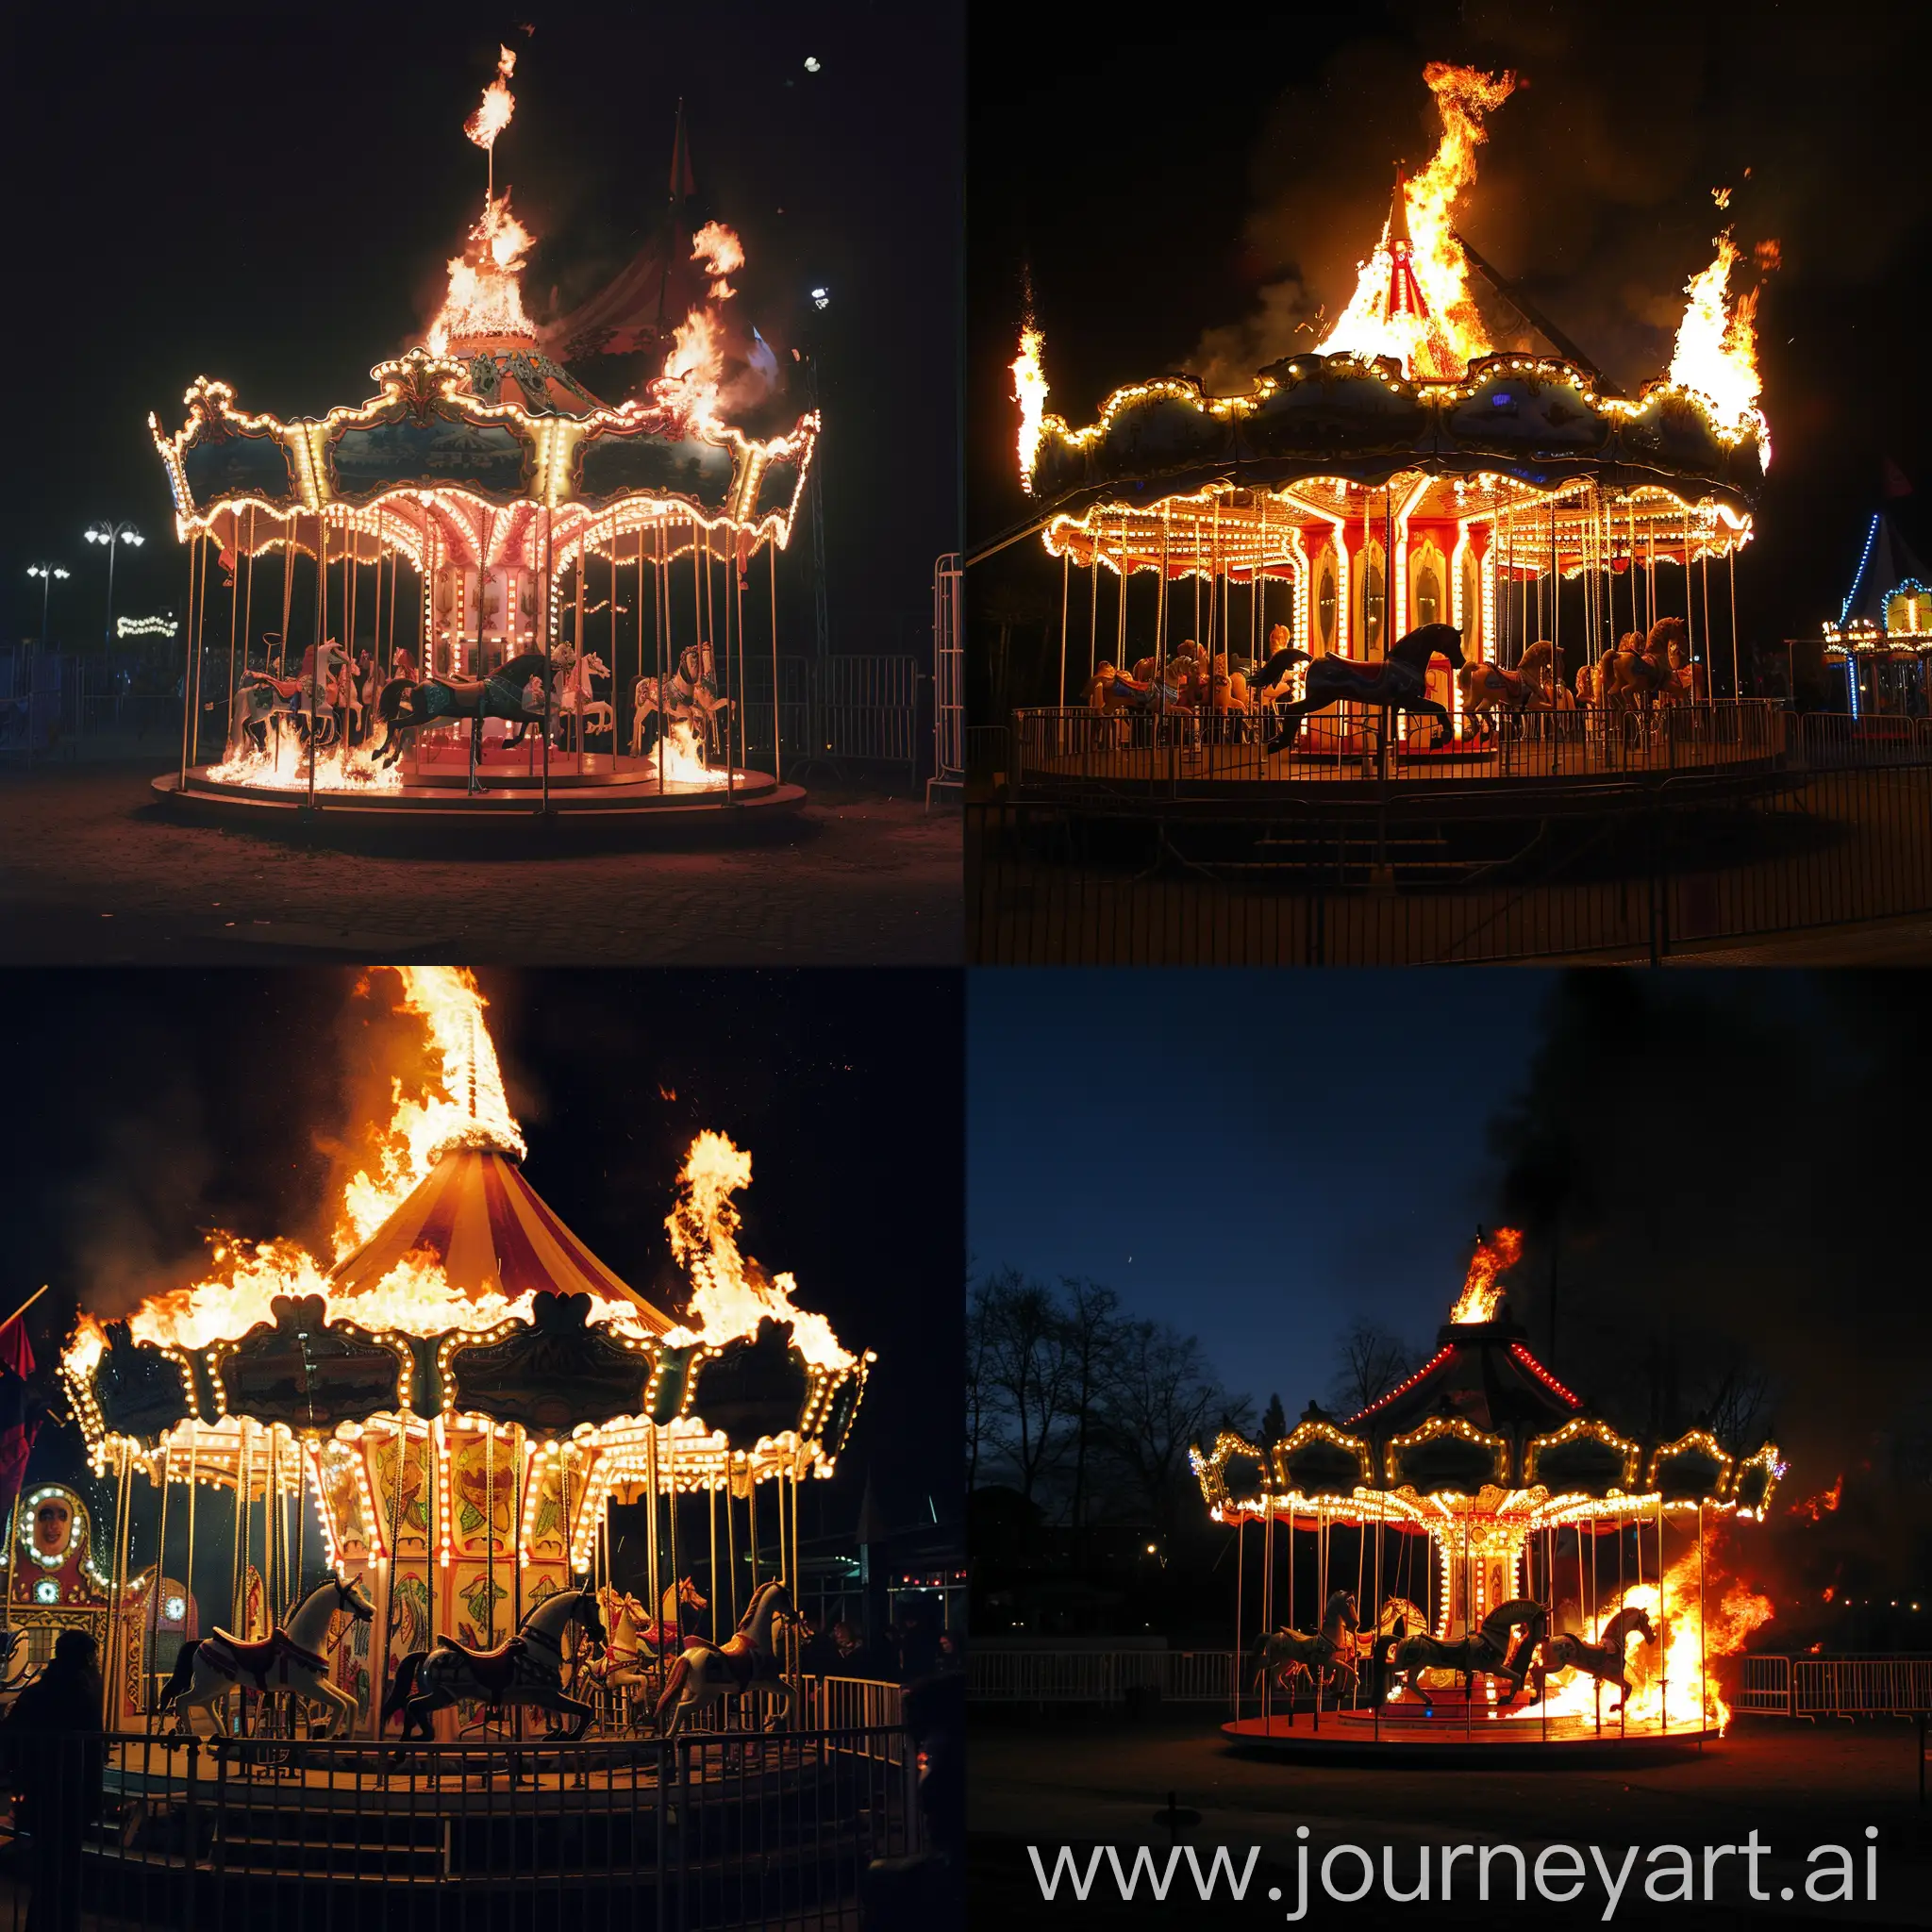 carrousel on fire  at night